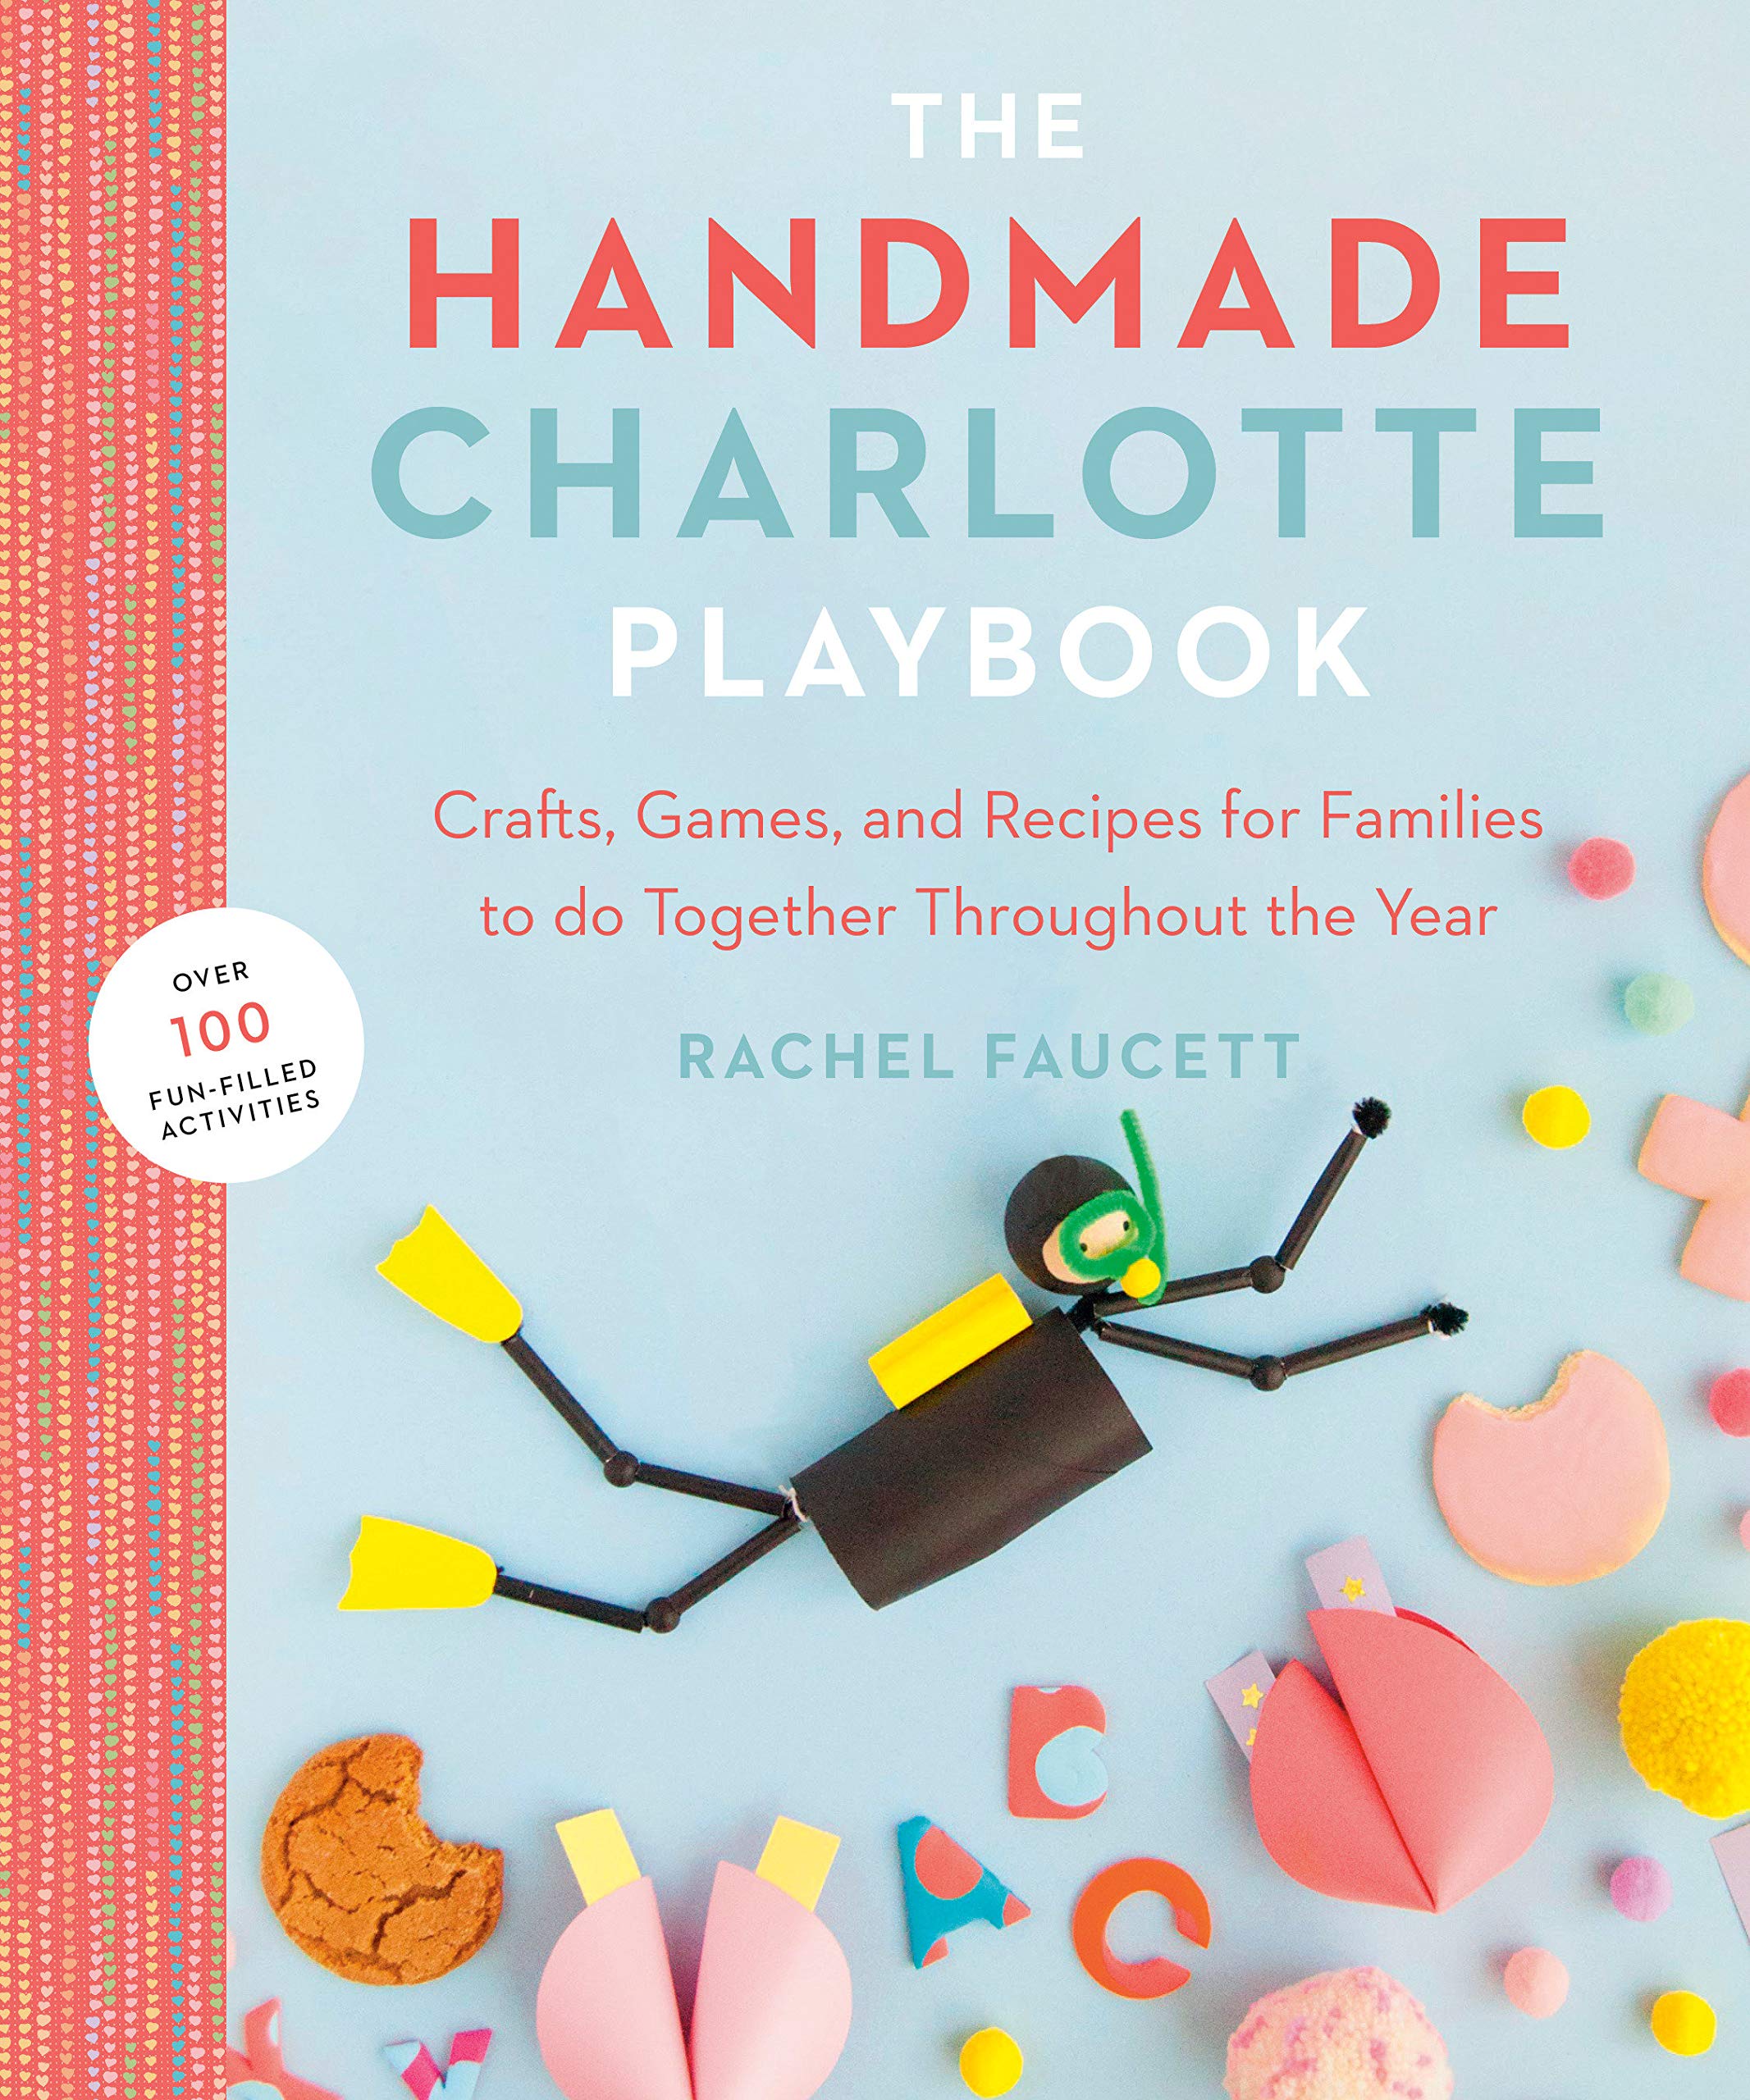 The Handmade Charlotte Playbook: Crafts, Games and Recipes for Families to do Together Throughout the Year